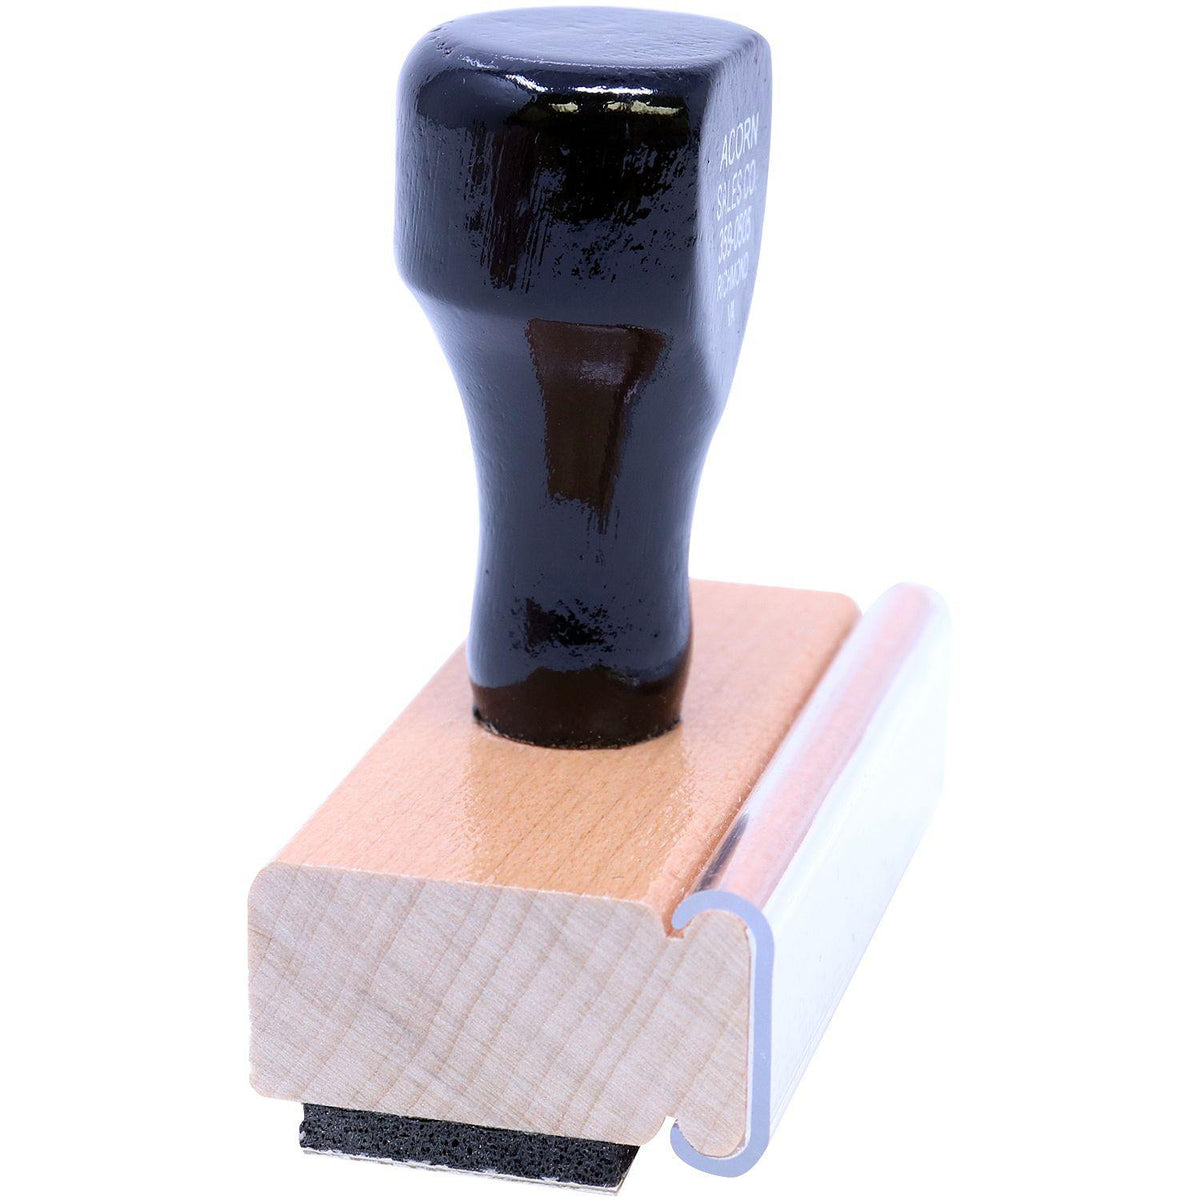 Side View of Thank You Rubber Stamp at an Angle